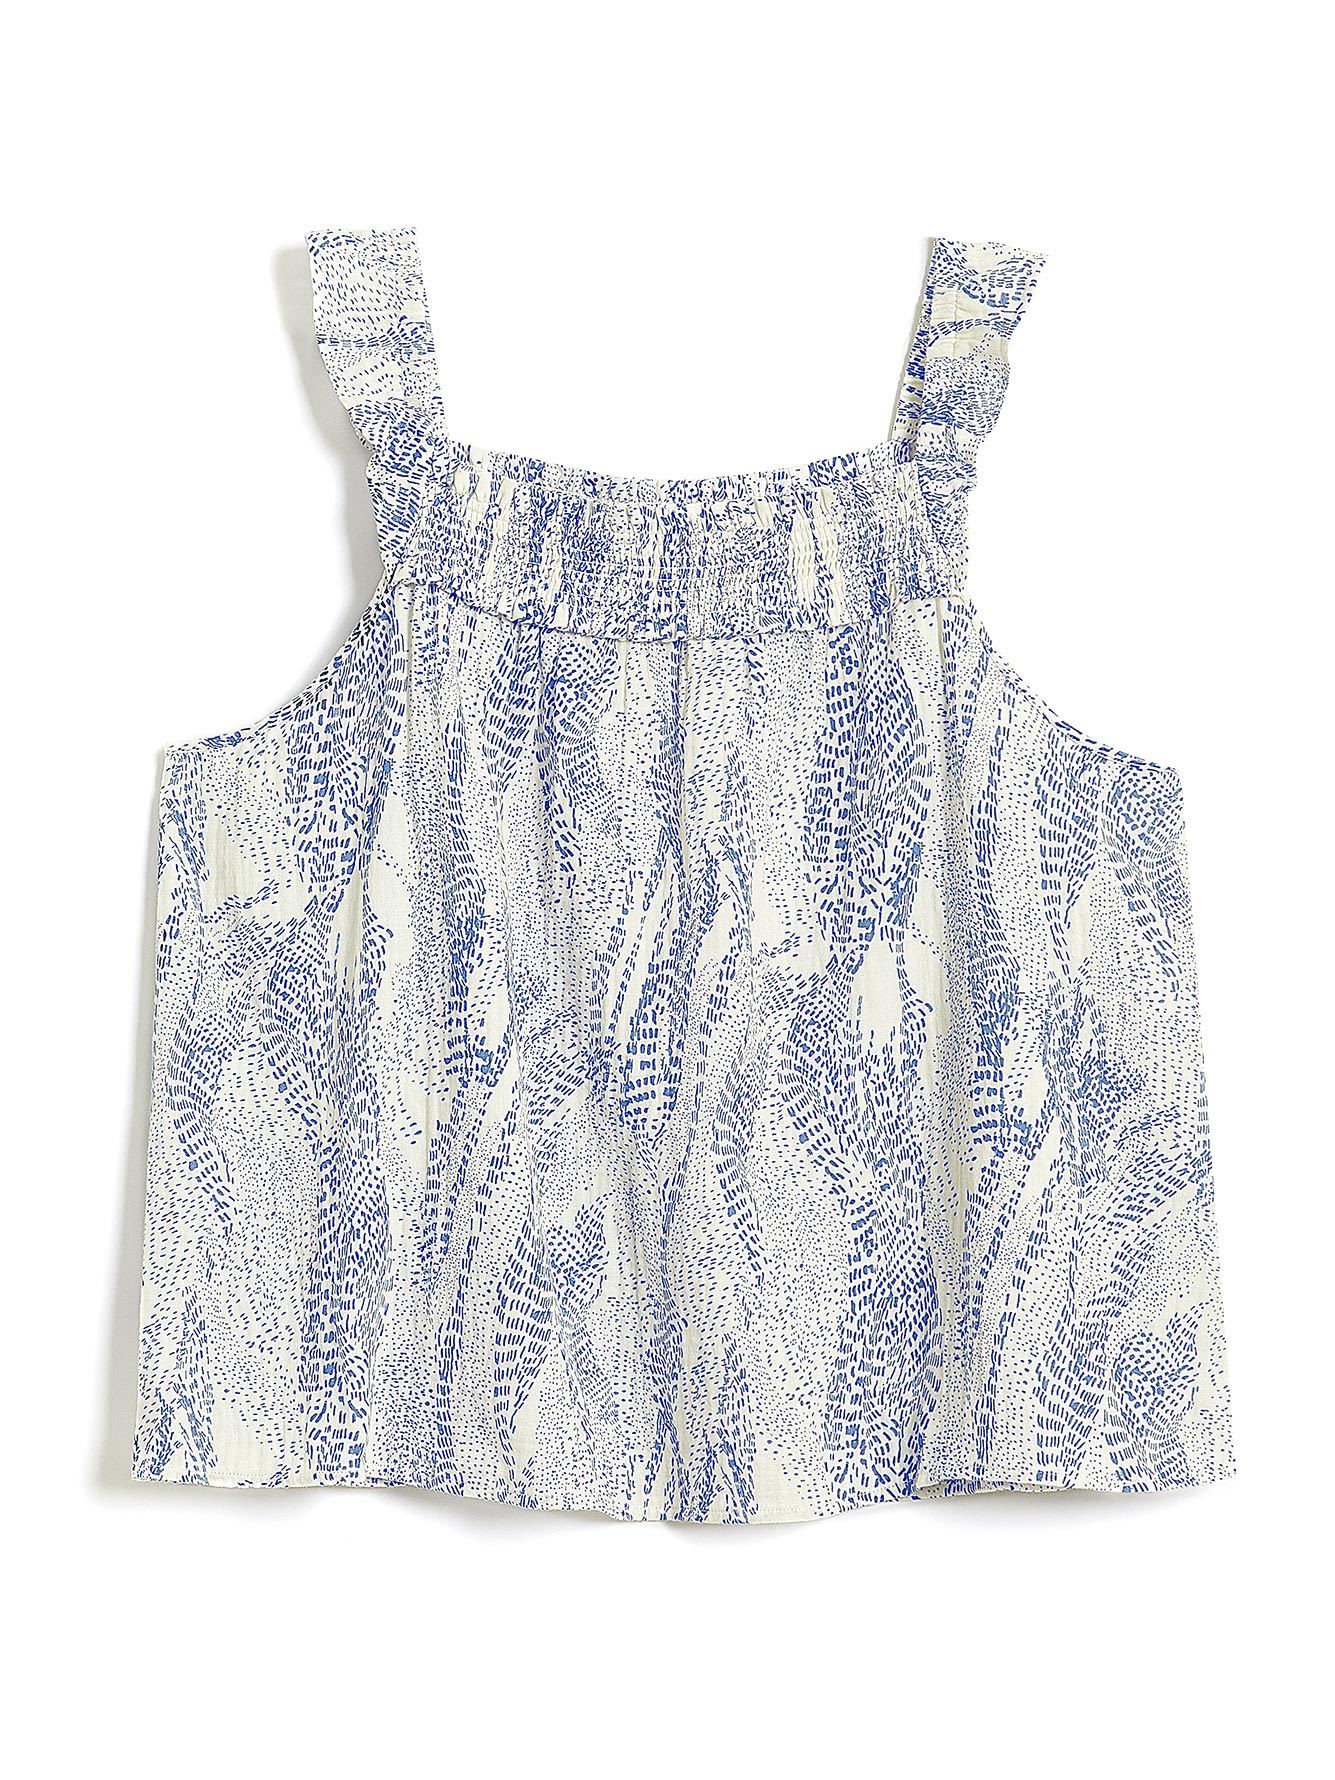 Responsible, Printed Blouse with Elastic Neckline